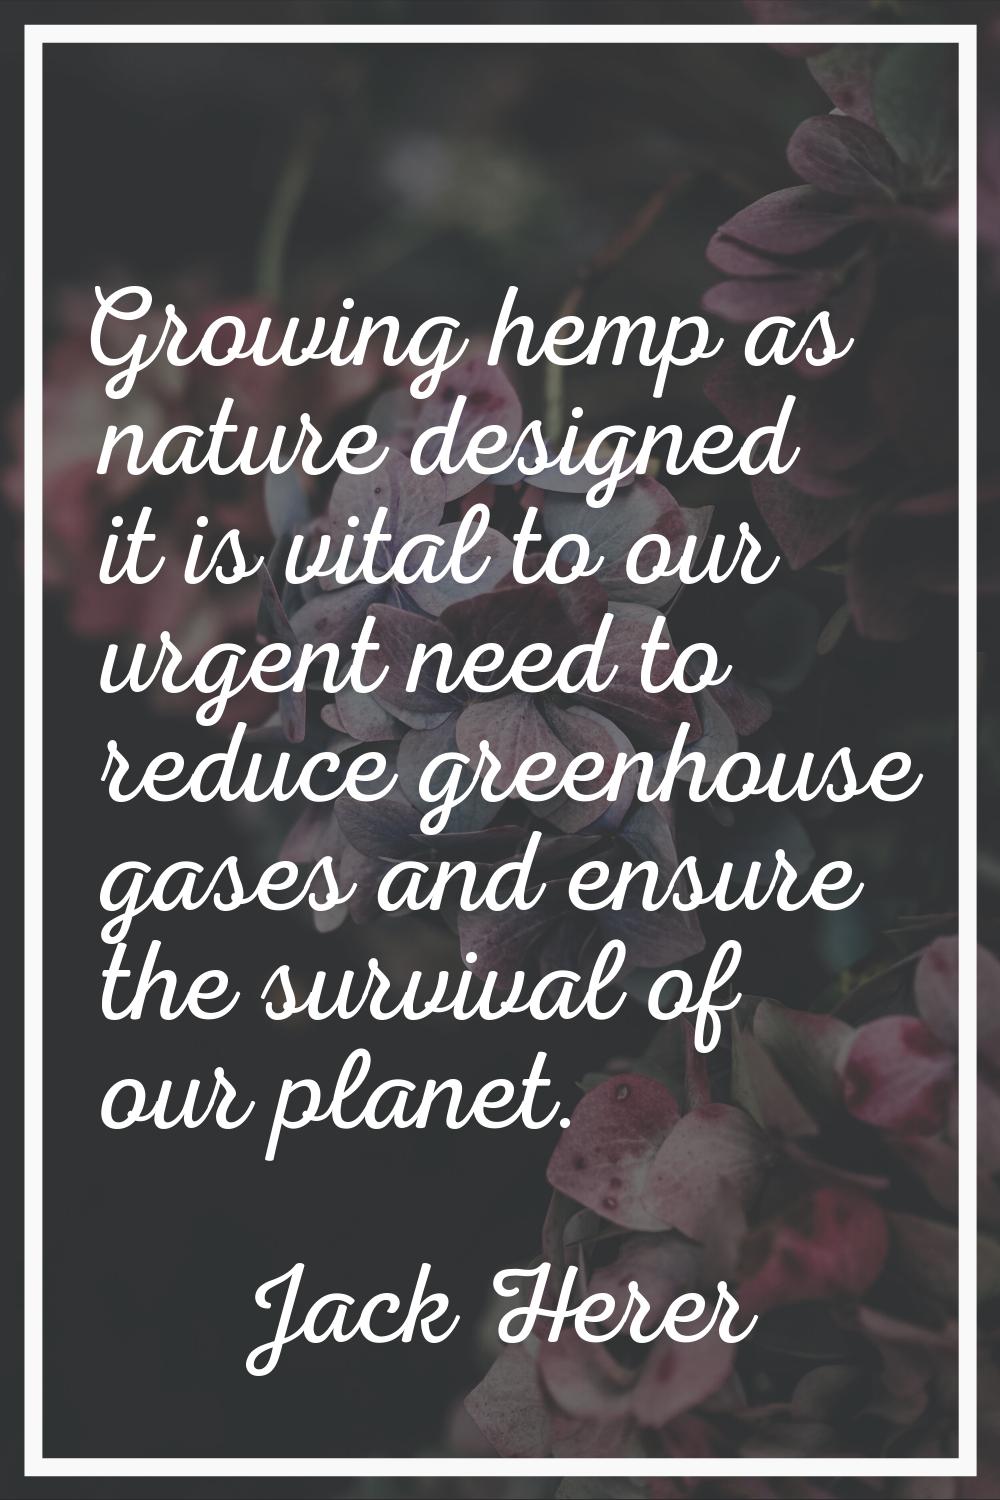 Growing hemp as nature designed it is vital to our urgent need to reduce greenhouse gases and ensur